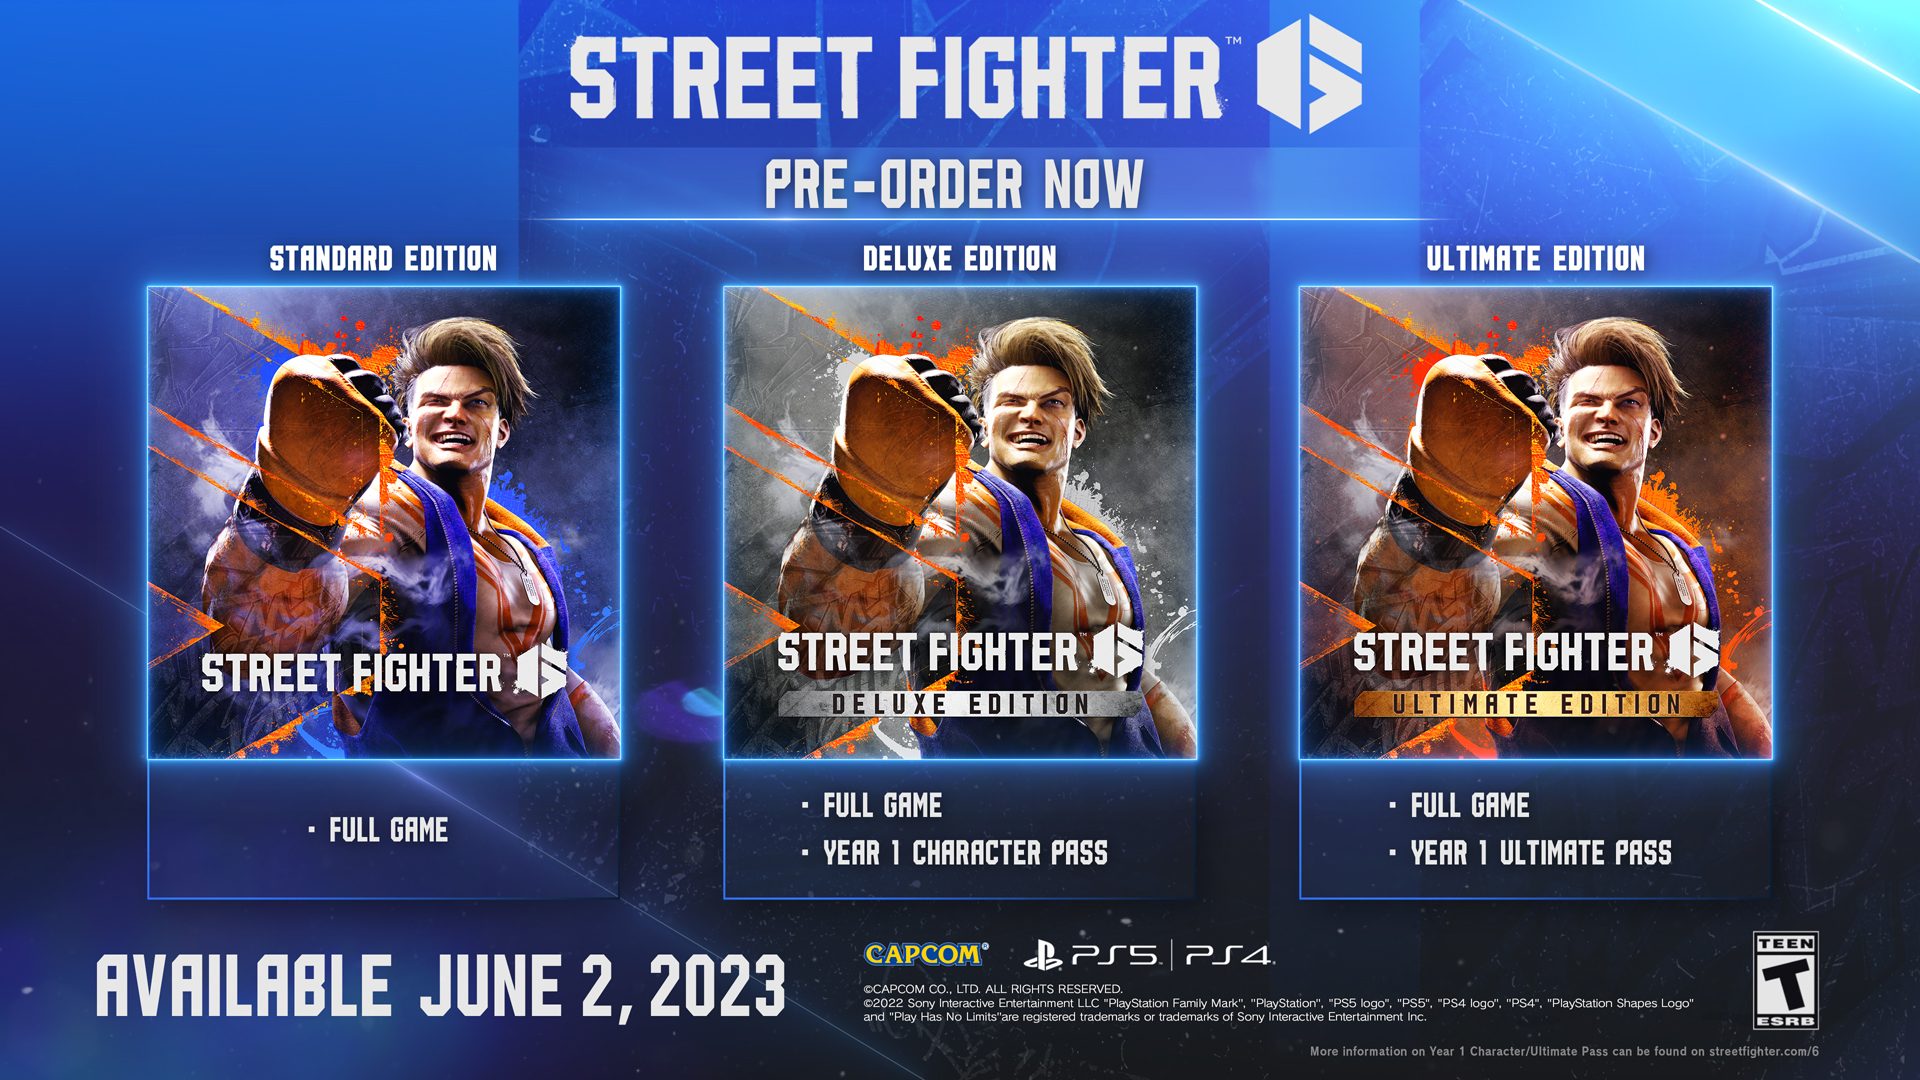 Street Fighter 6 launches June 2, – 2023